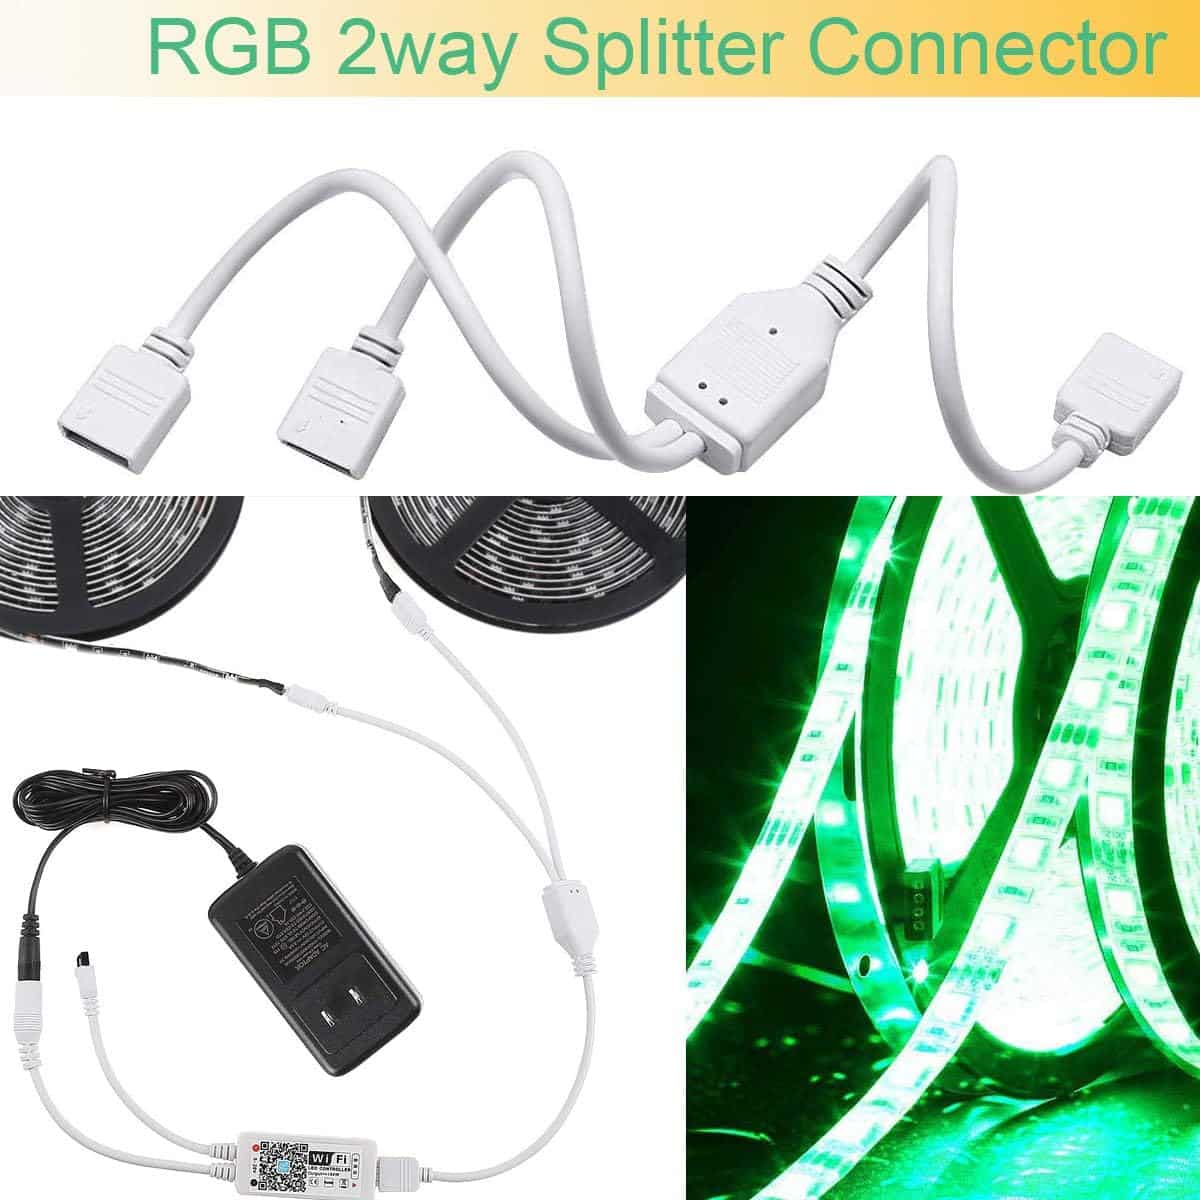 FSJEE LED Strip Connector Kit Review